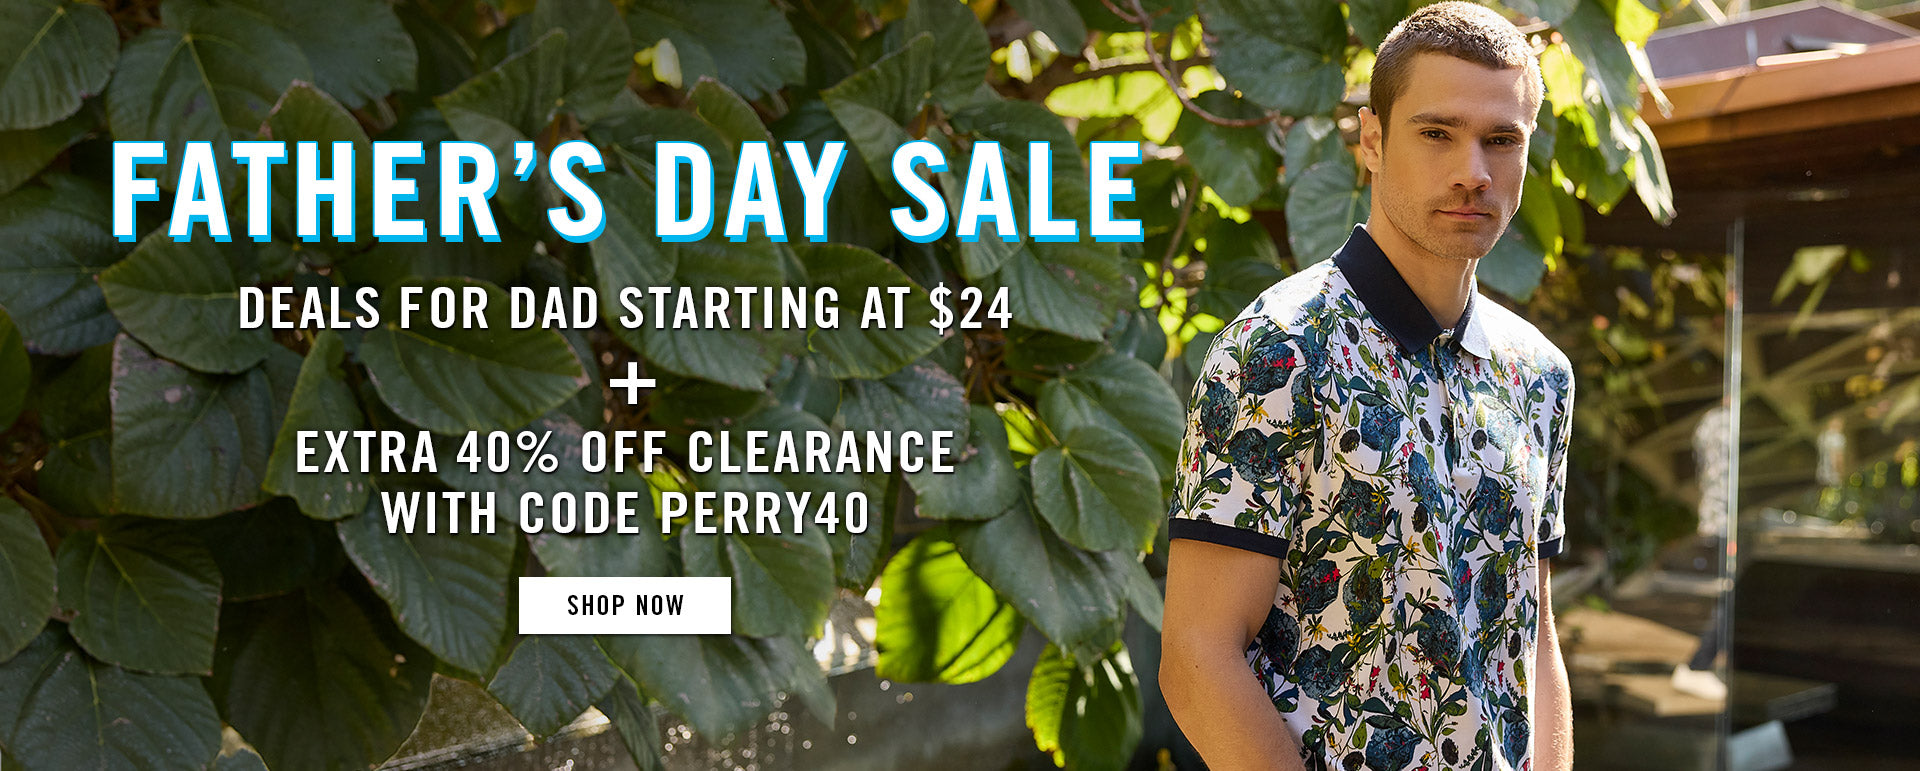 fathers day sale - DEALS FOR DAD STARTING AT $24| extra 40% off clearance with code PERRY40 | SHOP NOW